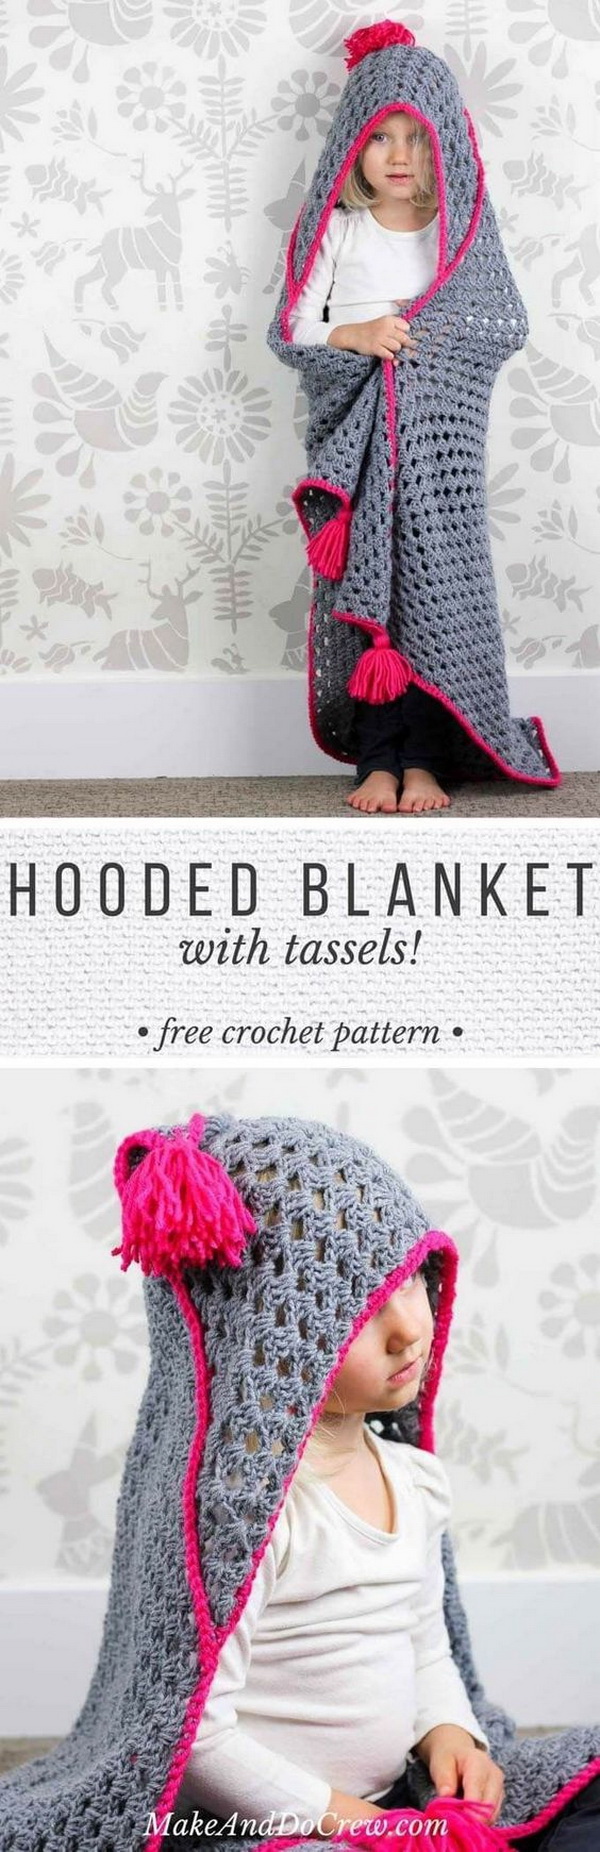 Quick And Easy Crochet Blanket Patterns For Beginners: Modern Crochet Hooded Baby Blanket with Free Pattern. 